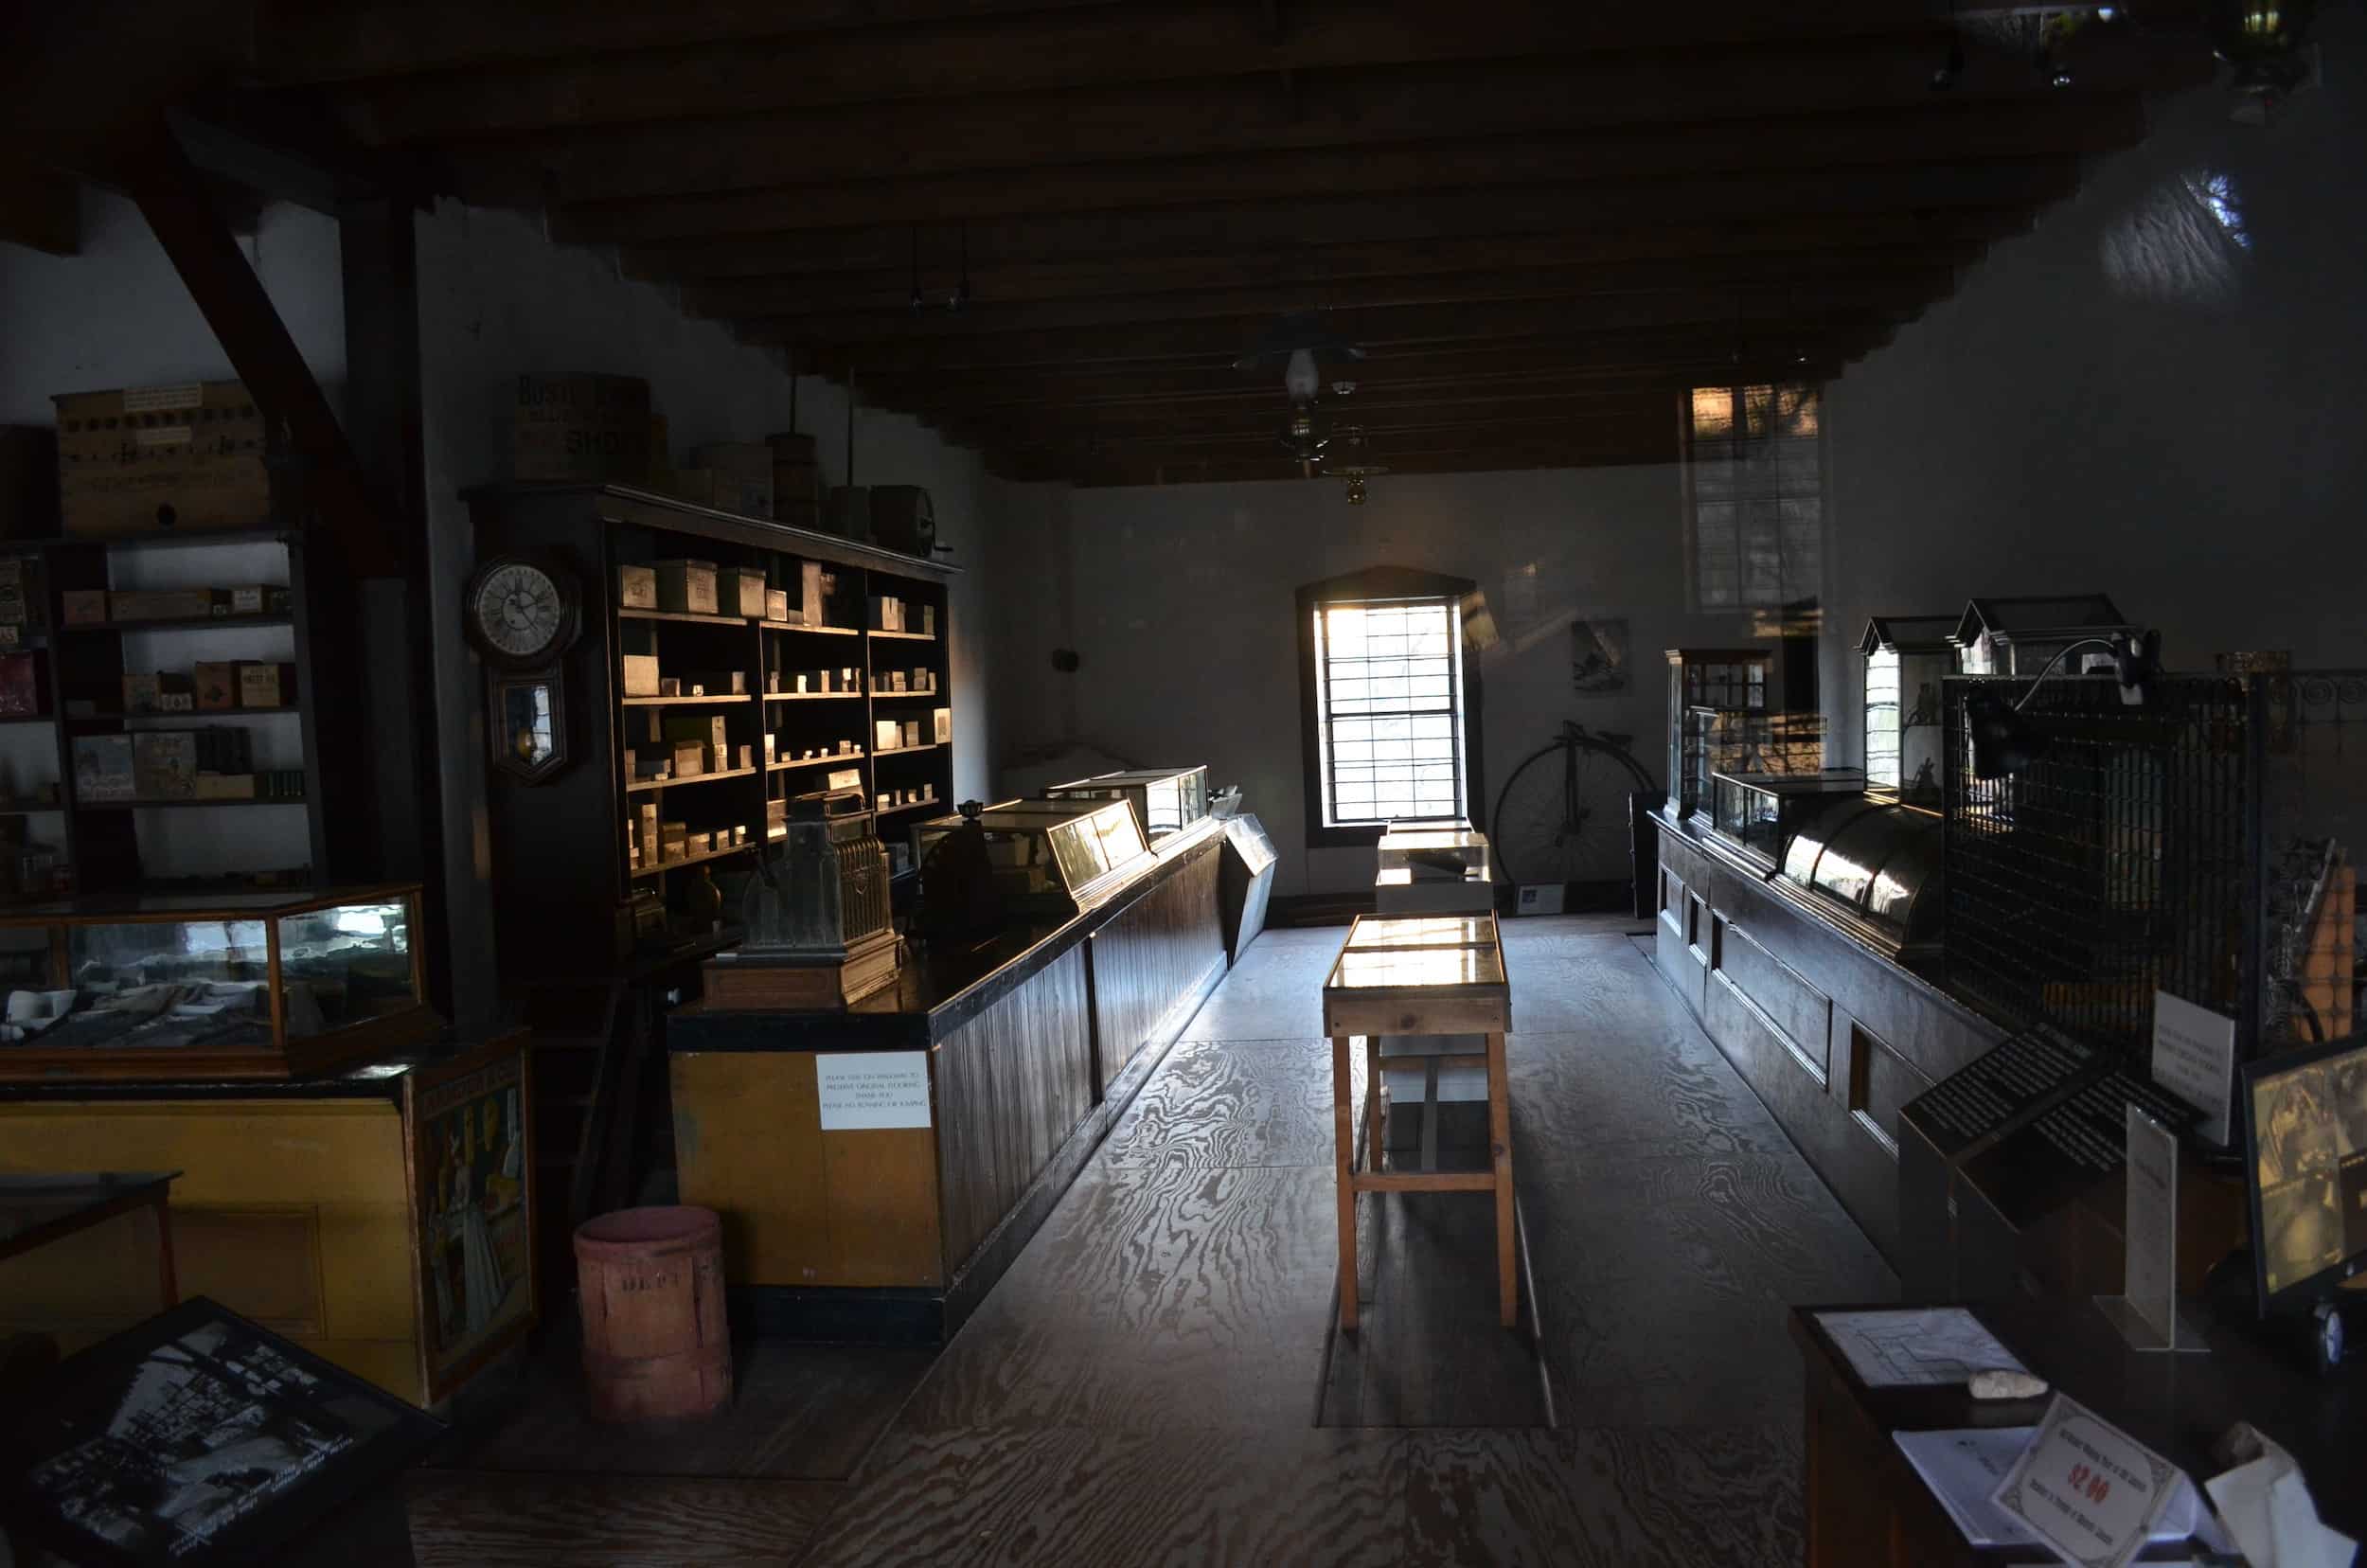 Tunstall Store in the town of Lincoln at the Lincoln Historic Site in New Mexico